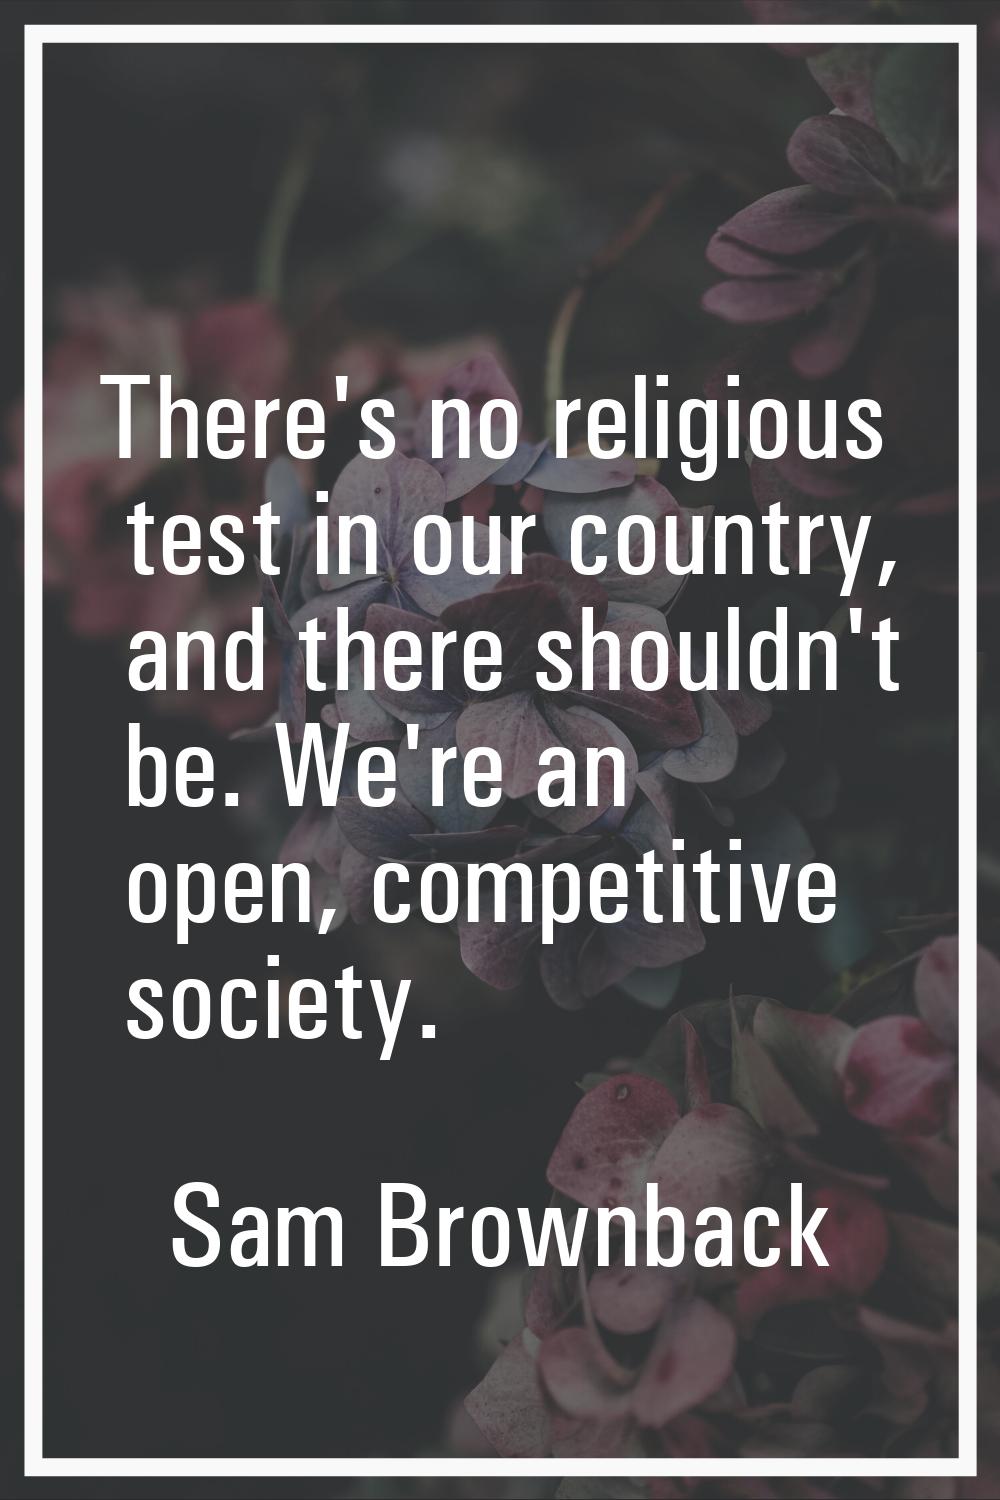 There's no religious test in our country, and there shouldn't be. We're an open, competitive societ